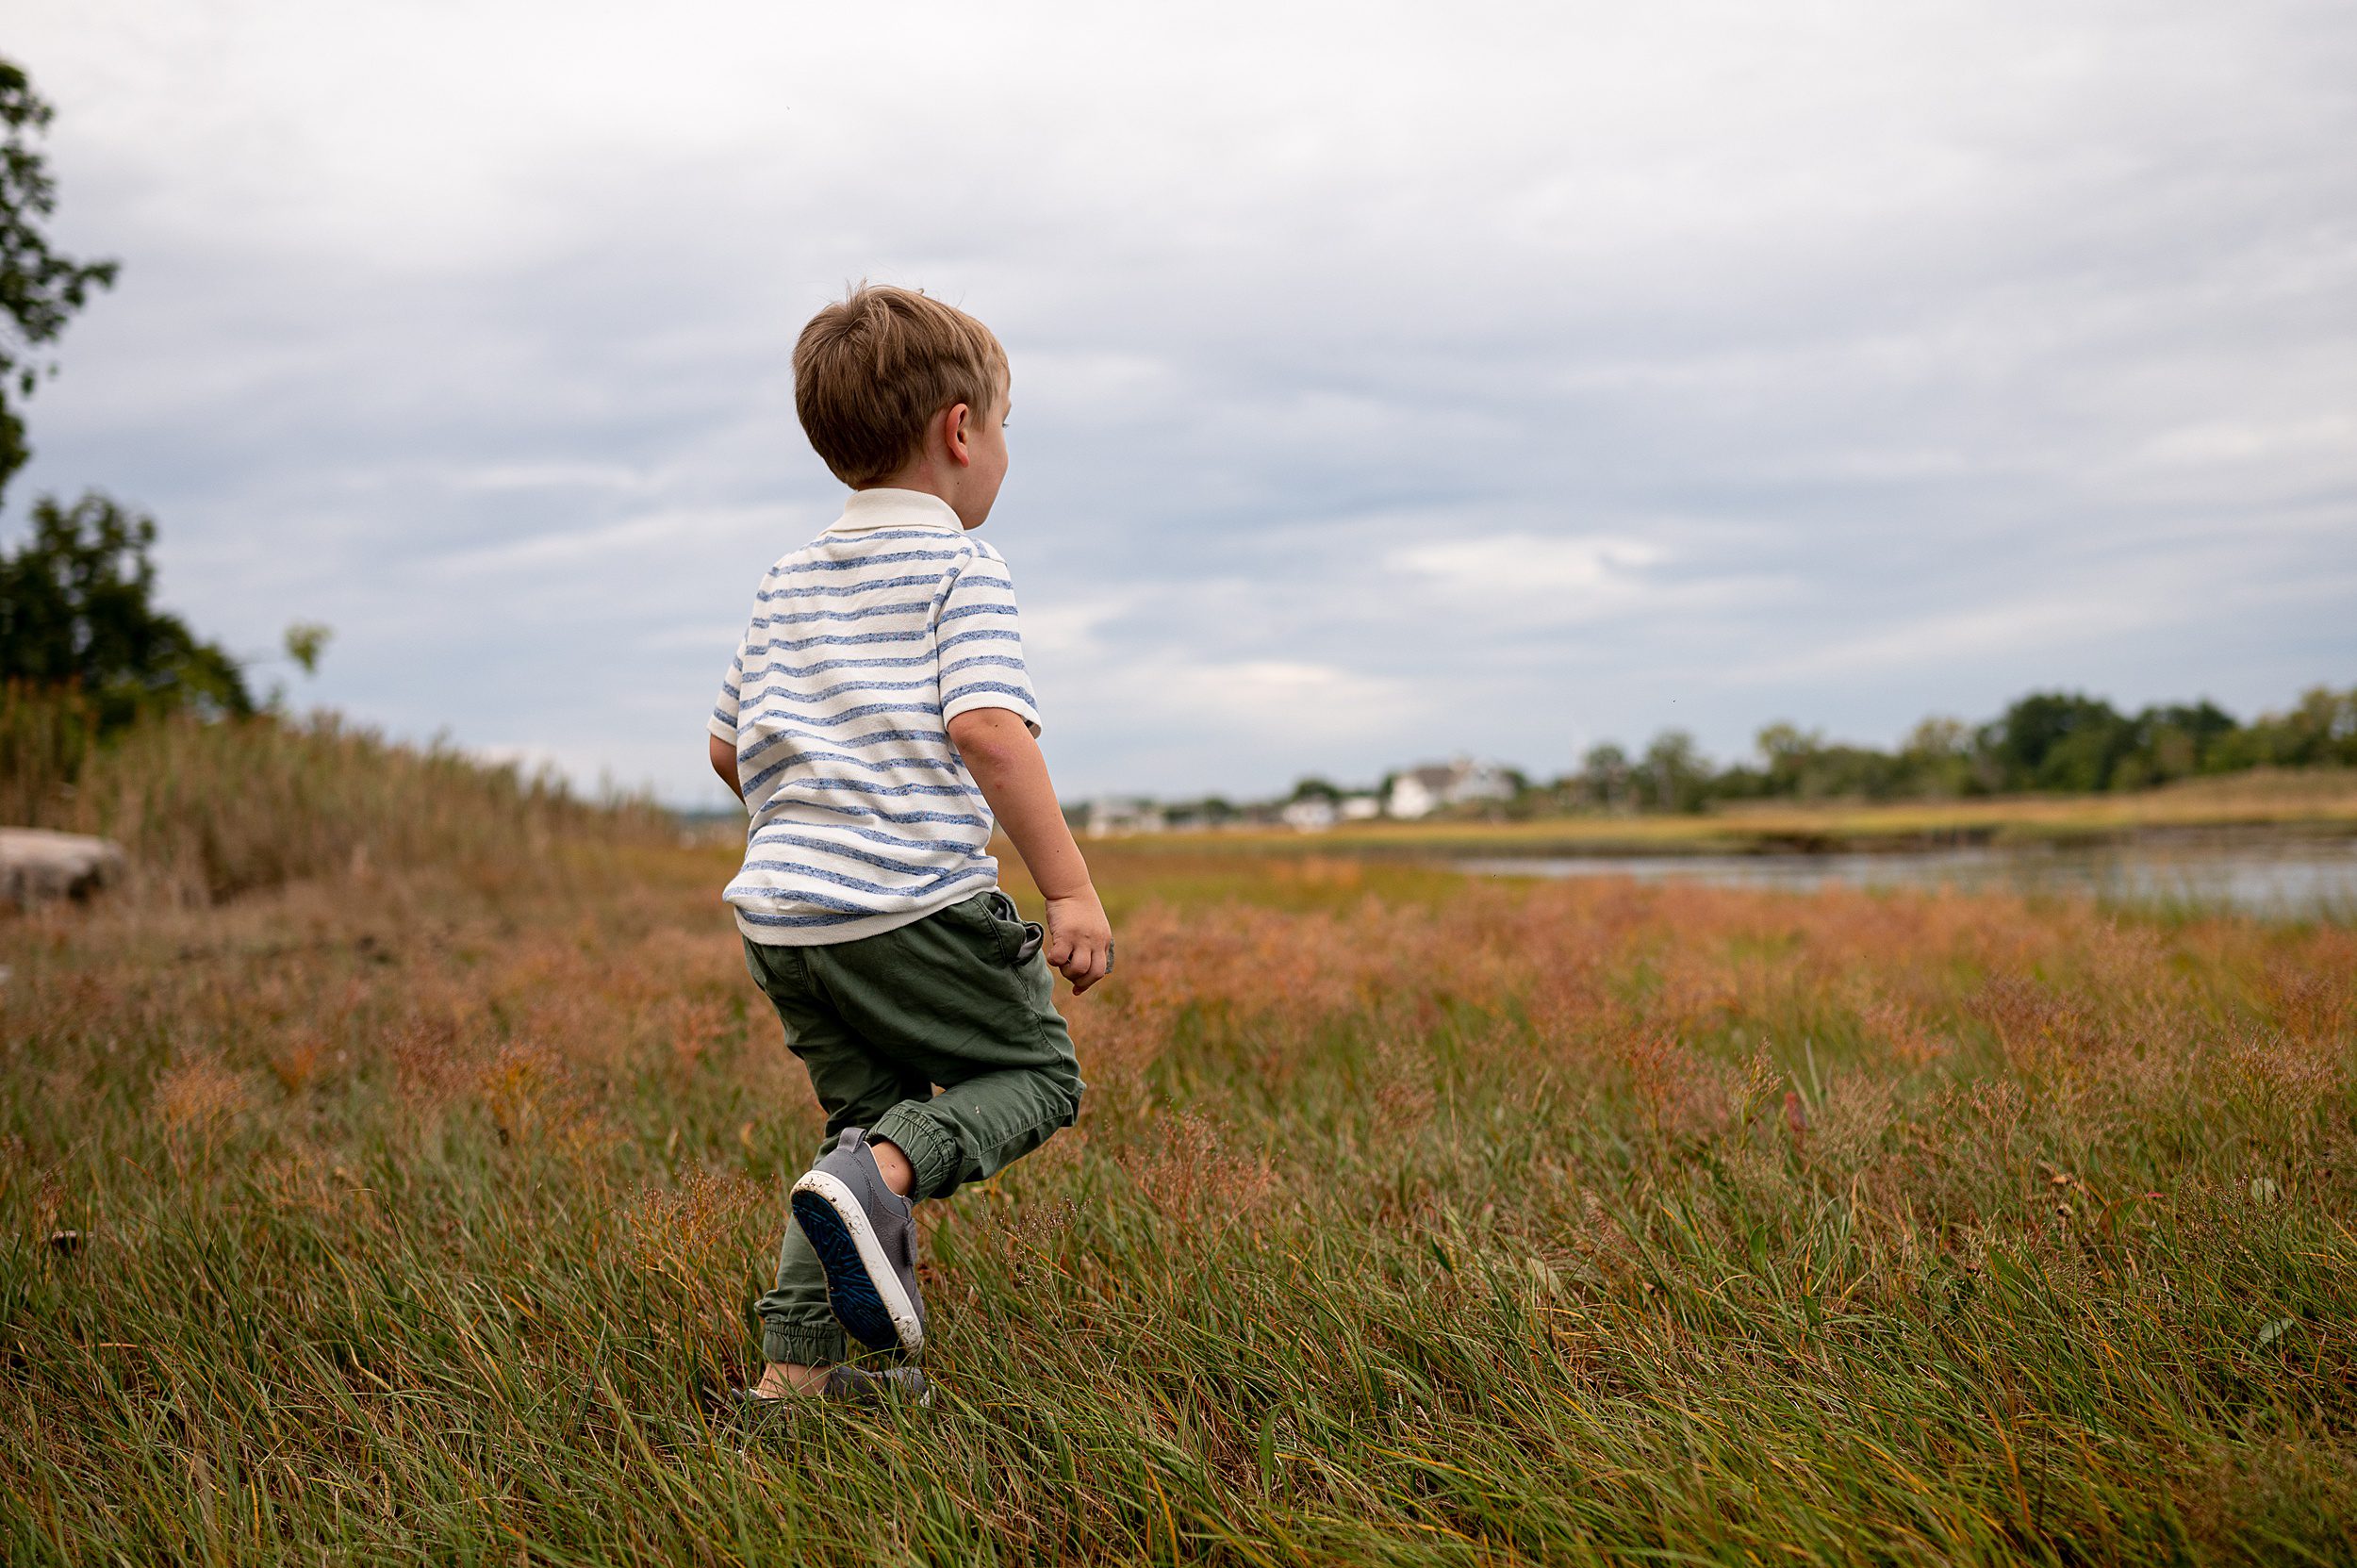 A young boy in a striped shirt and green pants runs through a grassy field on the way to a beach